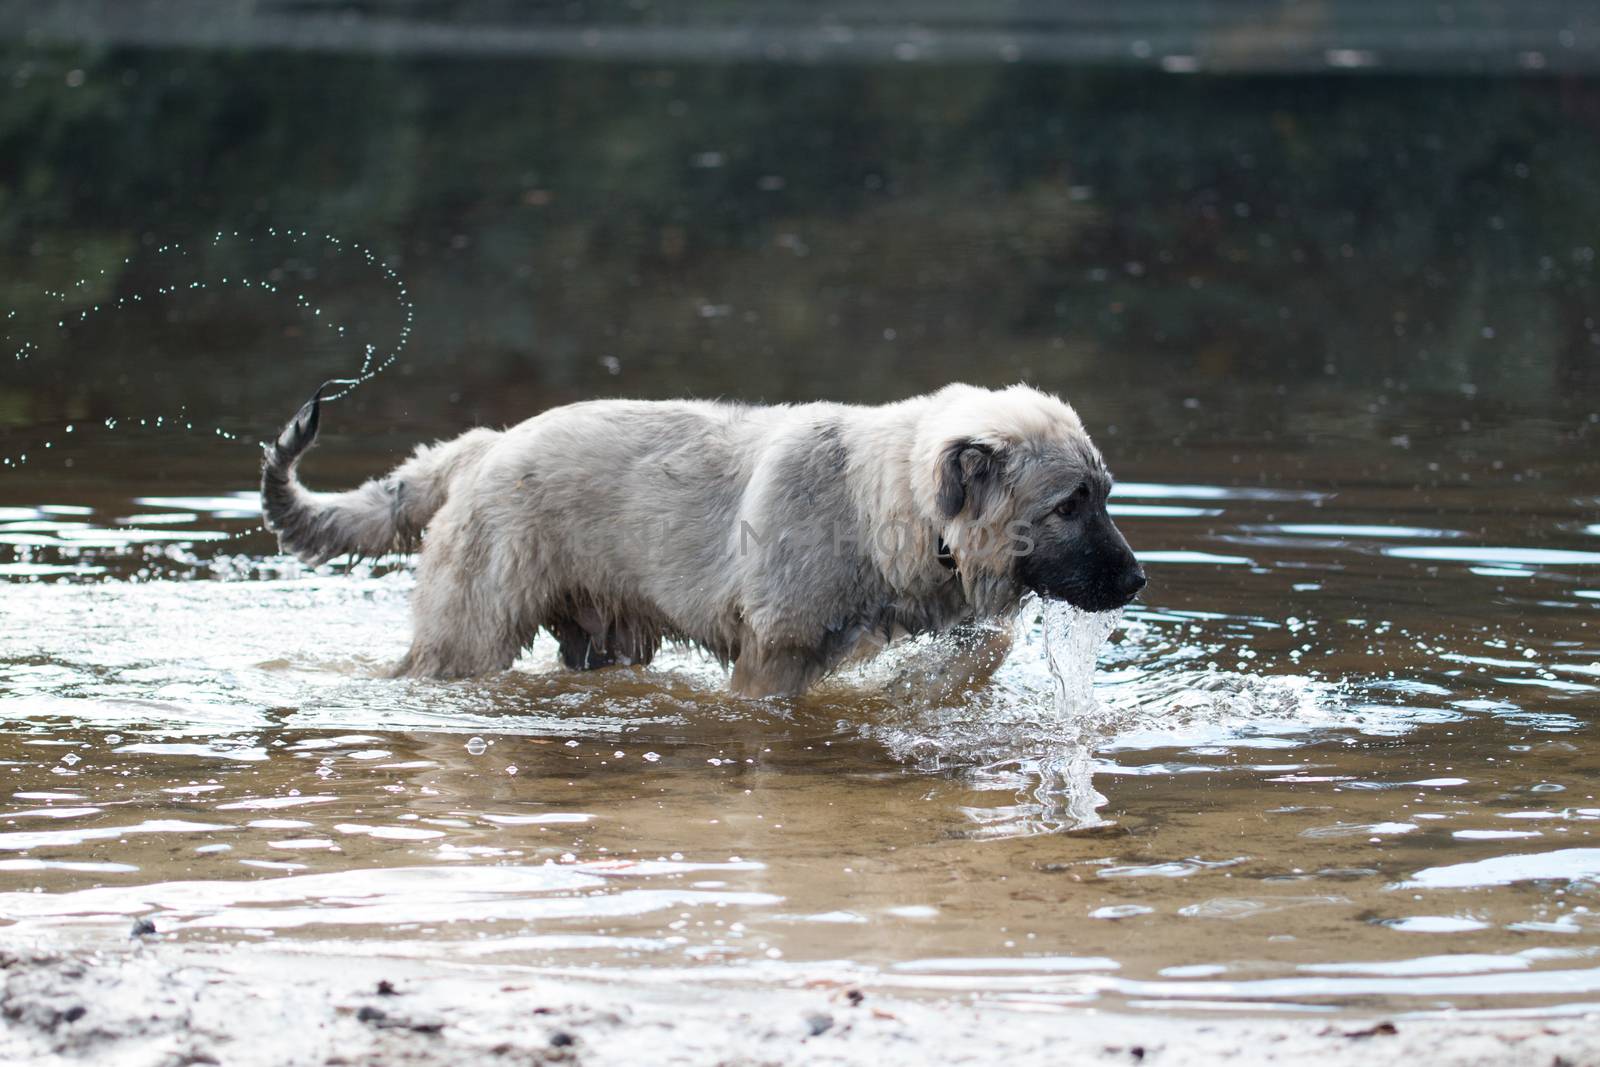 Young Turkish sheepdog playing in water